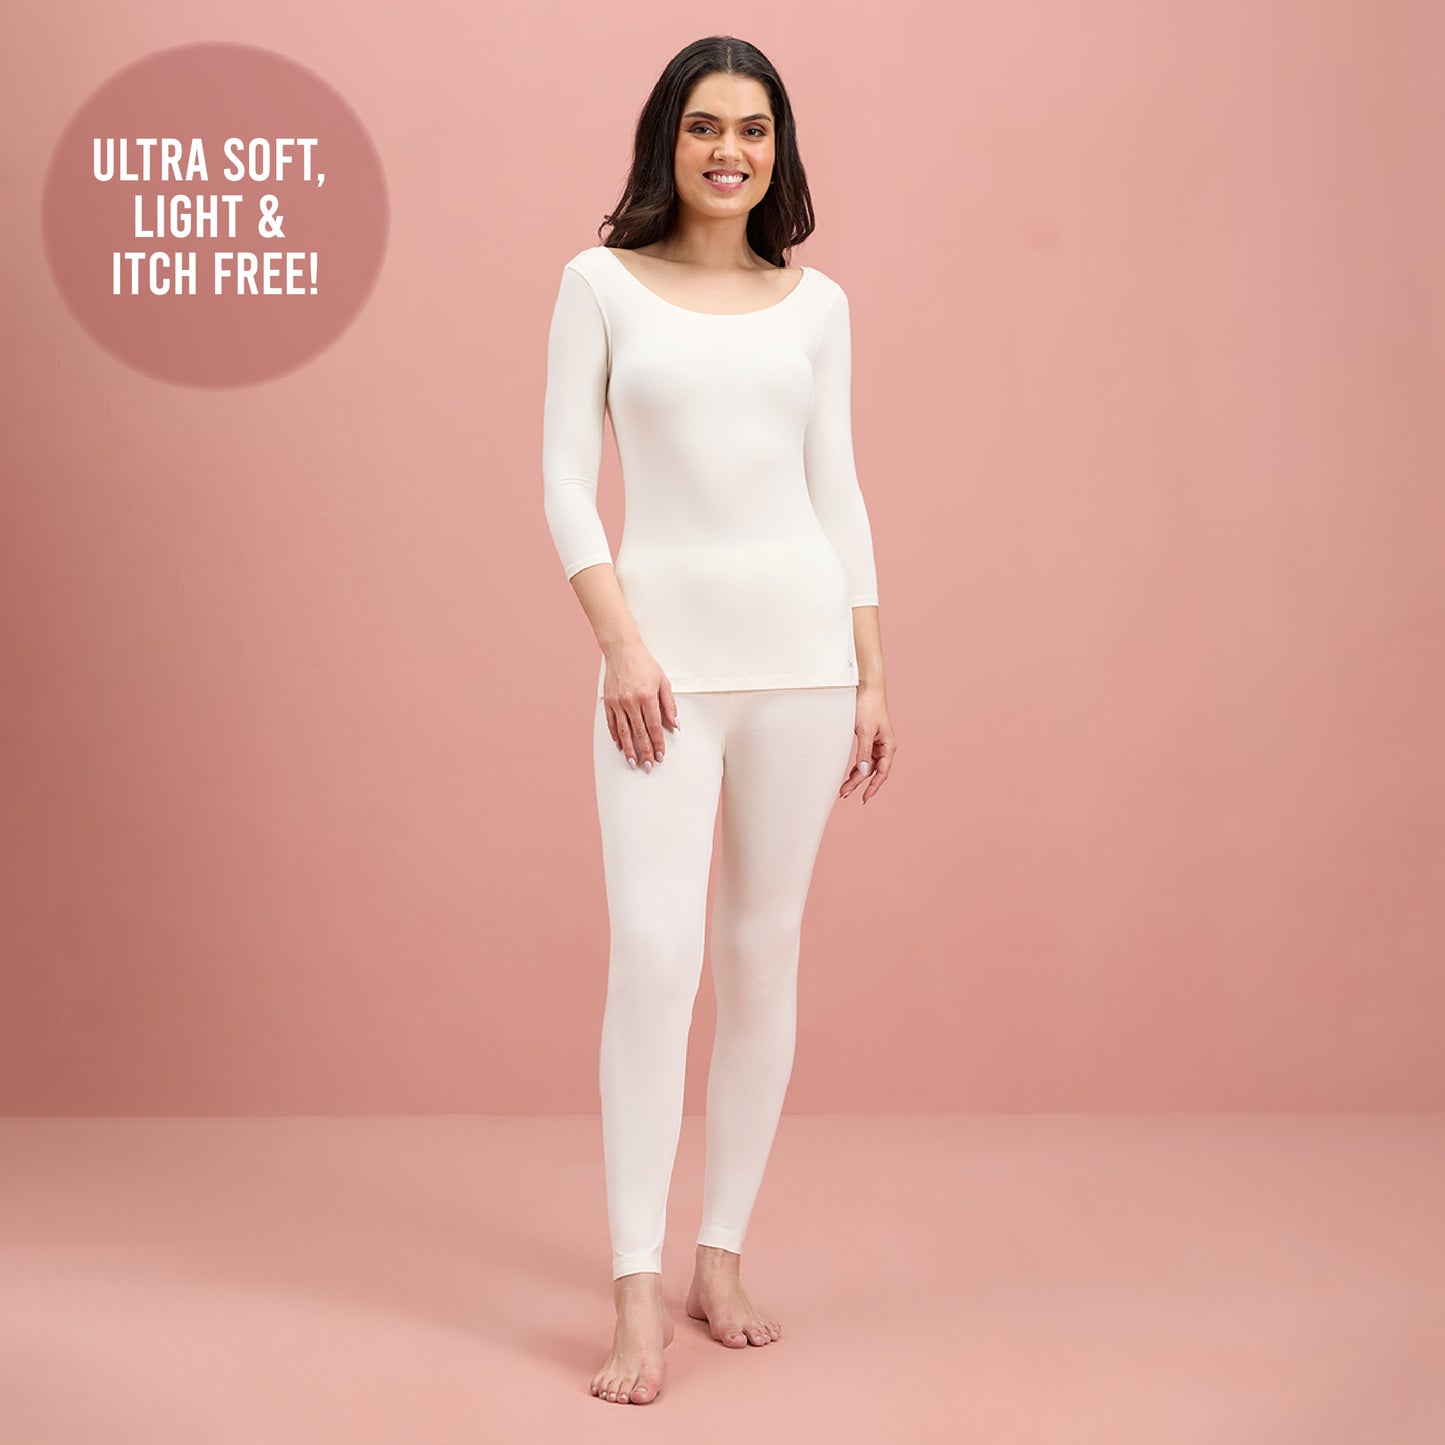 Ultra Light and Soft Thermal Top that stays hidden under clothes - NYOE05 White